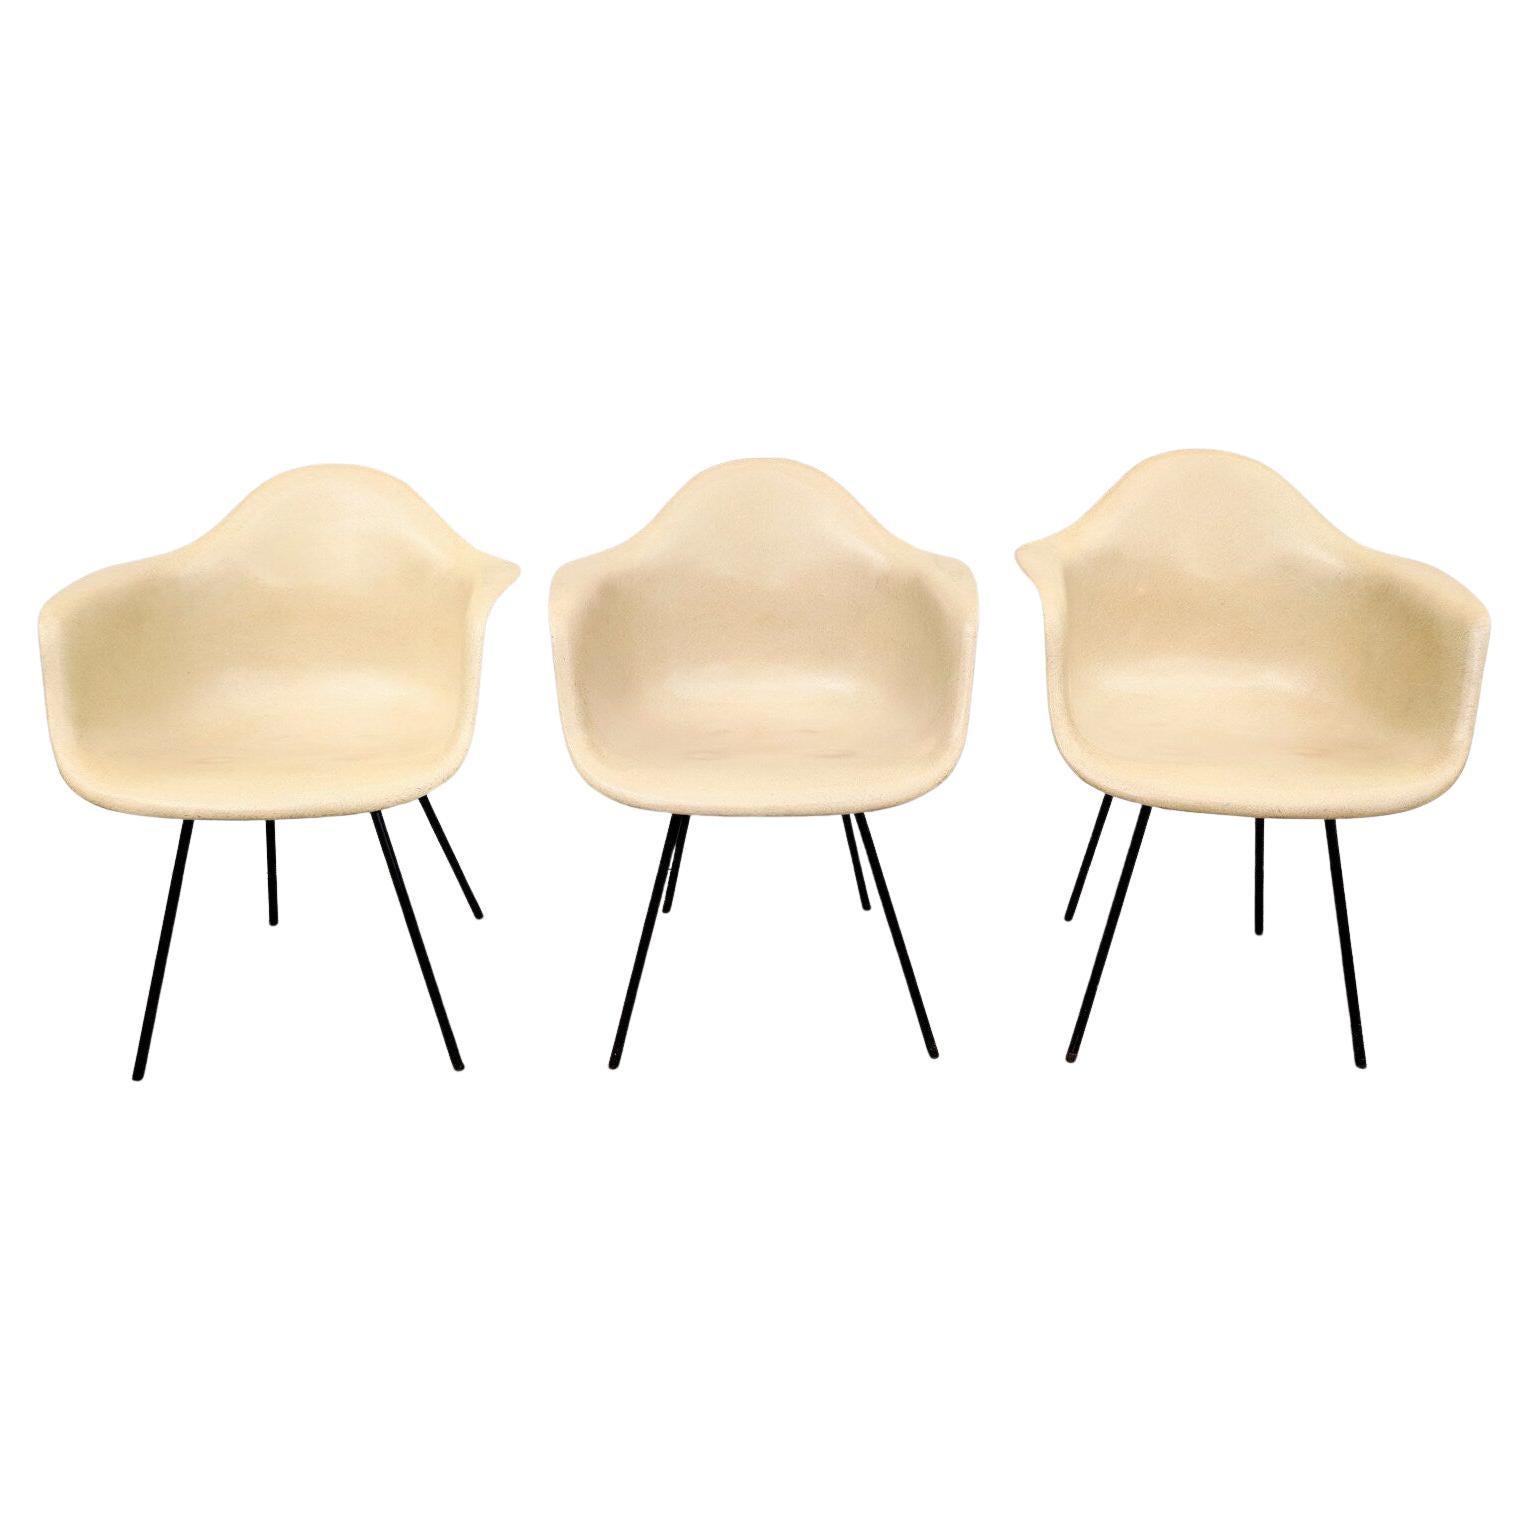 Mid Century Modern Early Eames DAX Armed Shell Chair

Fiberglass in good condition and structurally sound. Some slight discoloration but overall above average vintage condition.

Additional information:
Materials: Fiberglass,Steel
Vintage from the